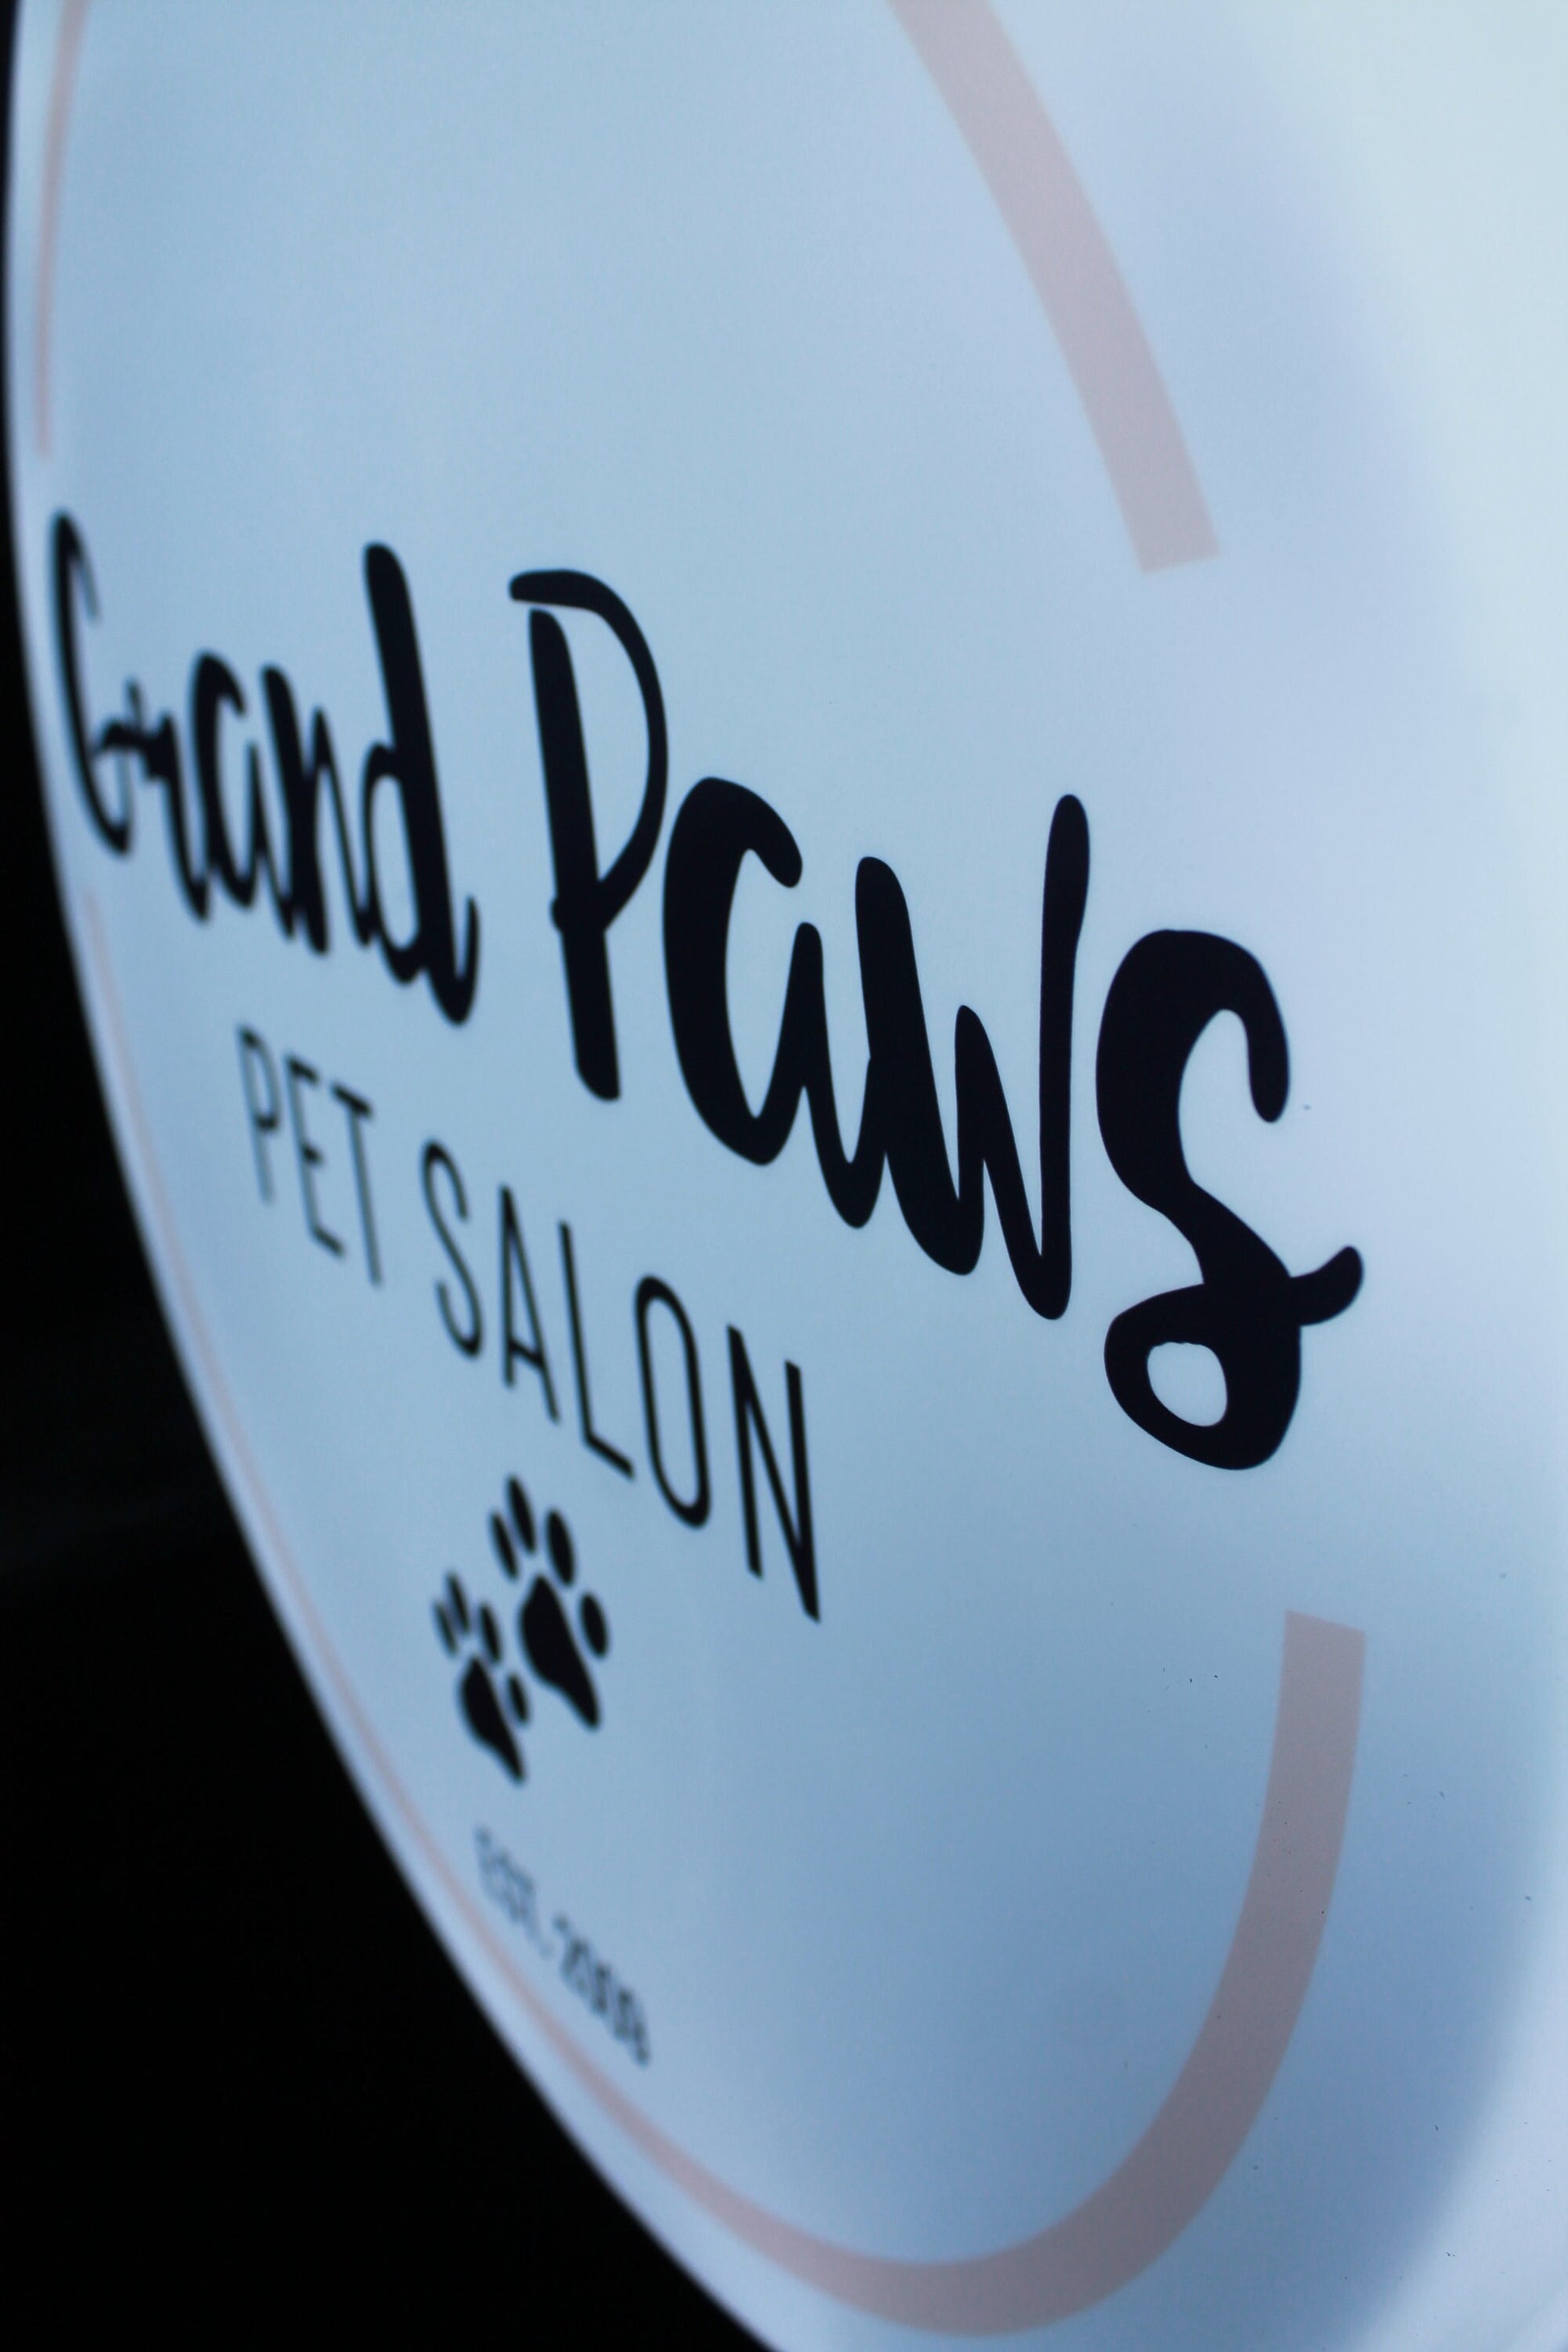 Custom Outdoor Pet Salon Paws Round Led Light Blade Sign Wall or Ceiling Mounted Circle Light Sign Store Front Commerical Signage Logo